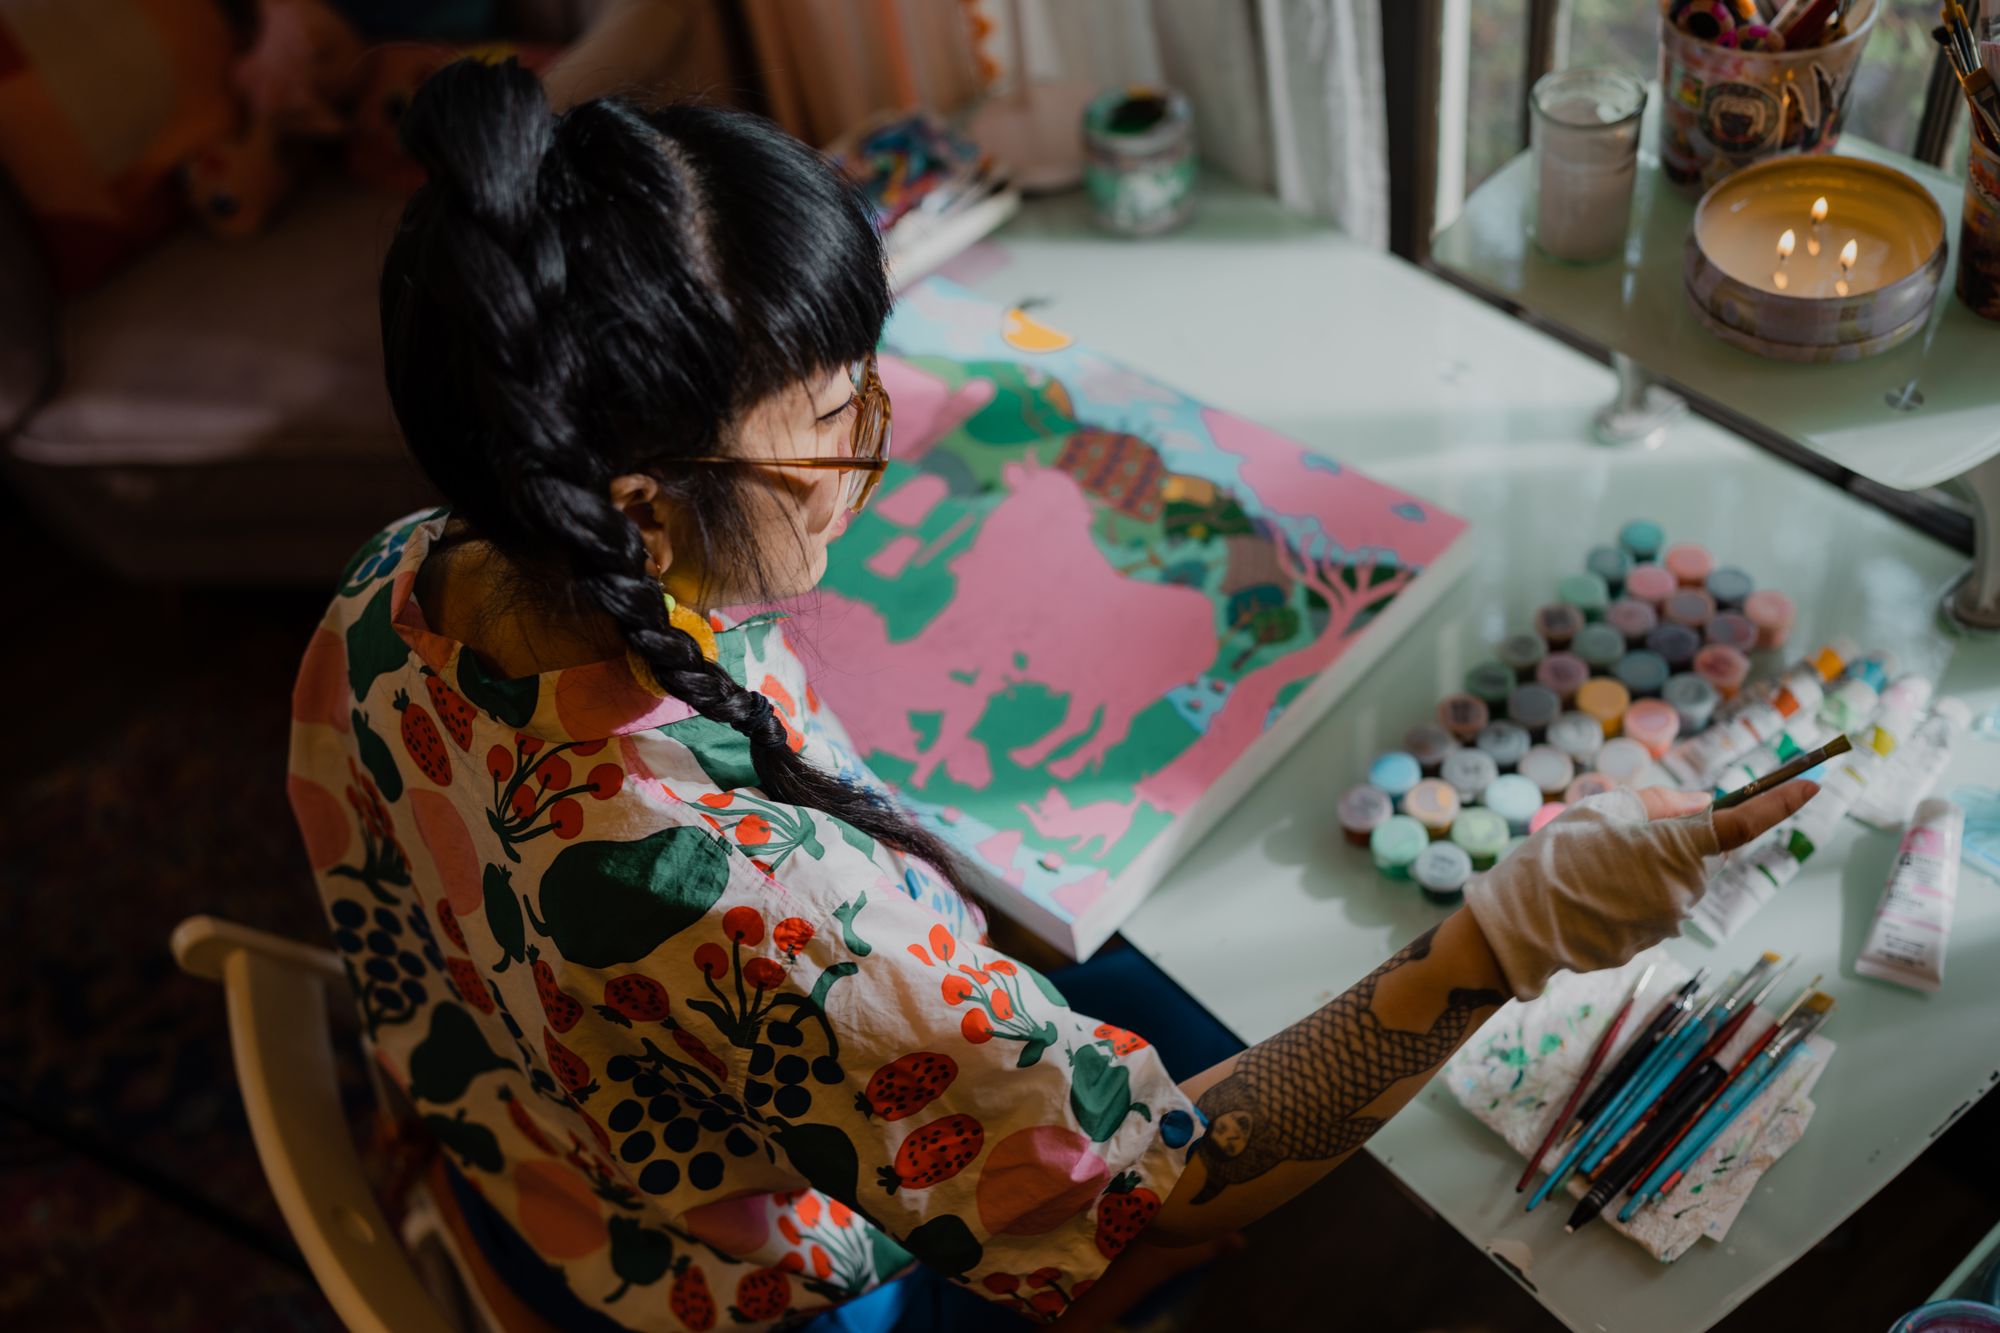 Candid photograph of painter and illustrator Kristen Liu-Wong working on a new painting in her home studio.